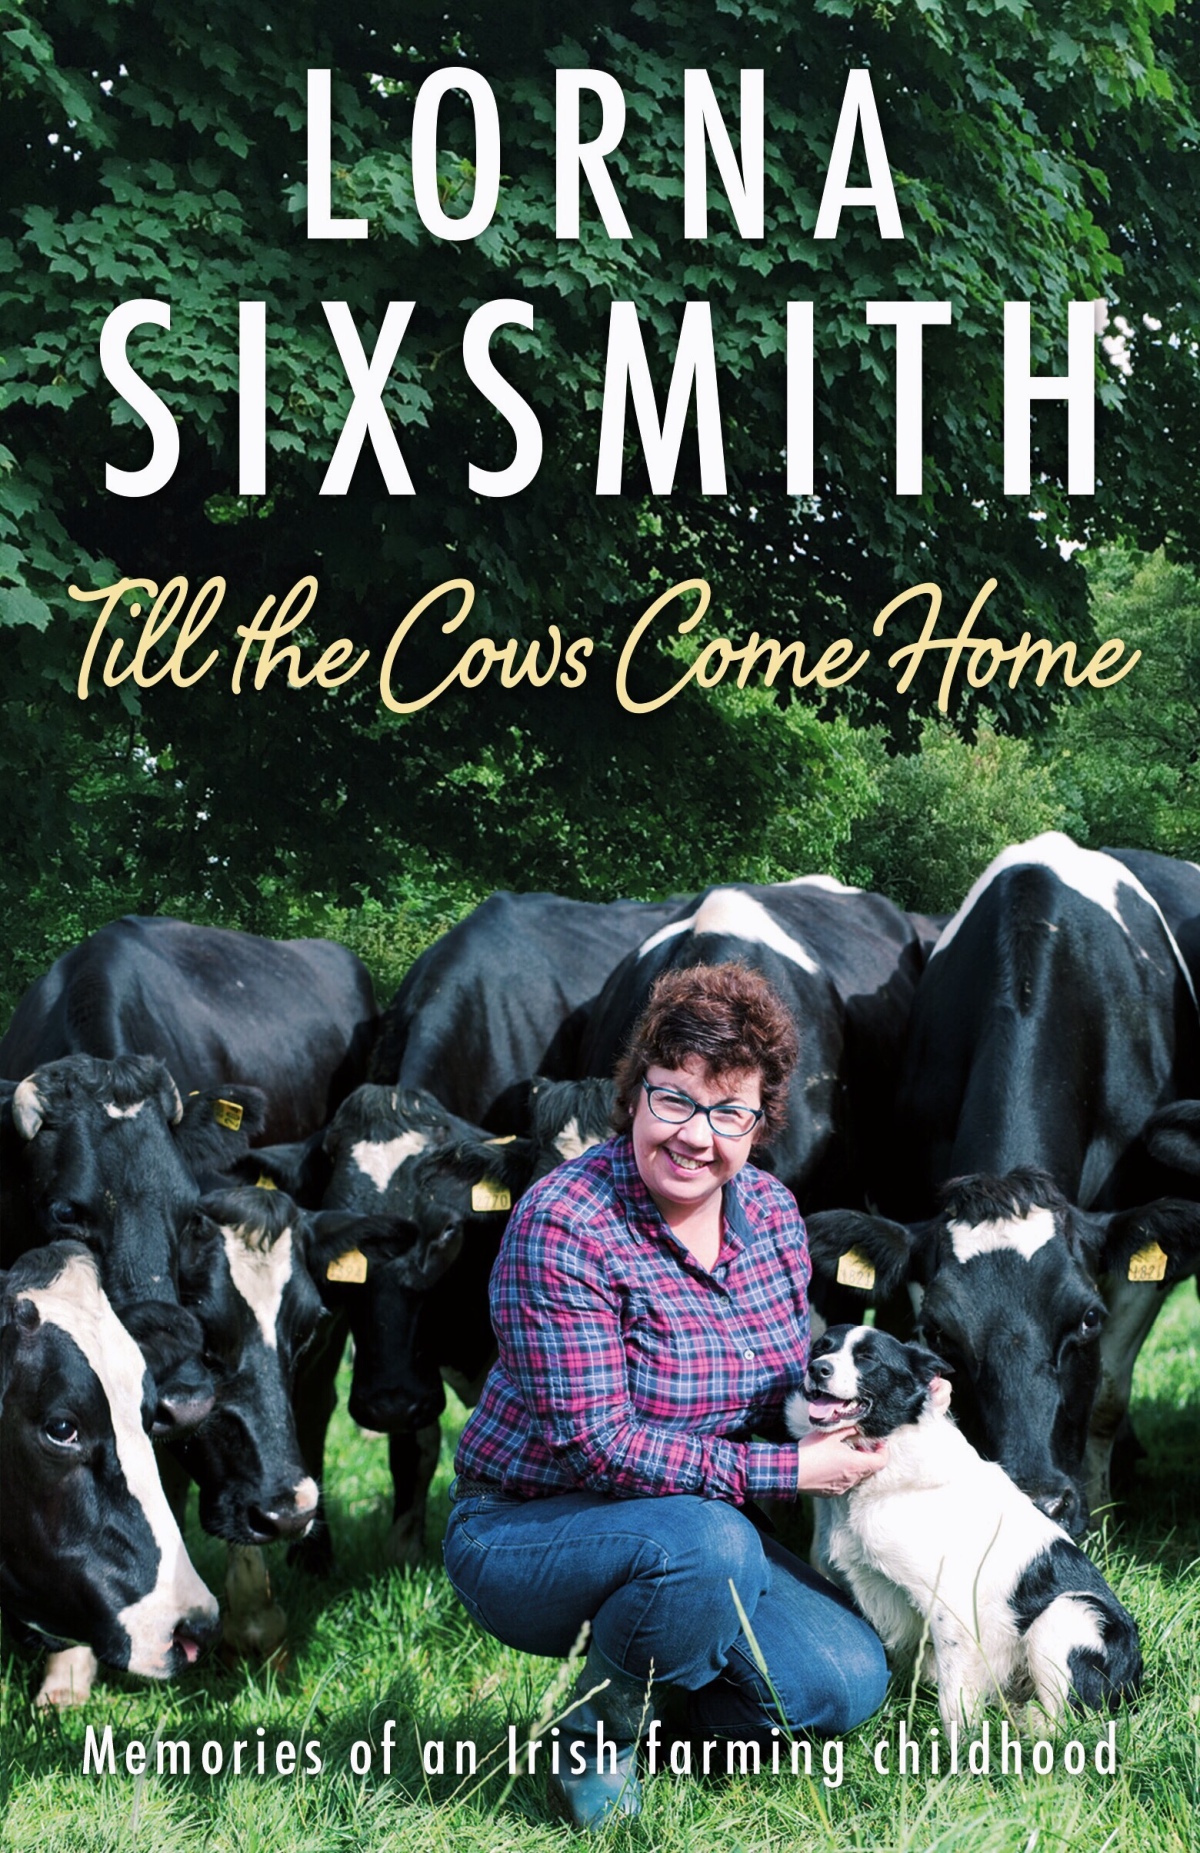 Lorna Sixsmith’s ‘Till the cows come home’ – Book Review